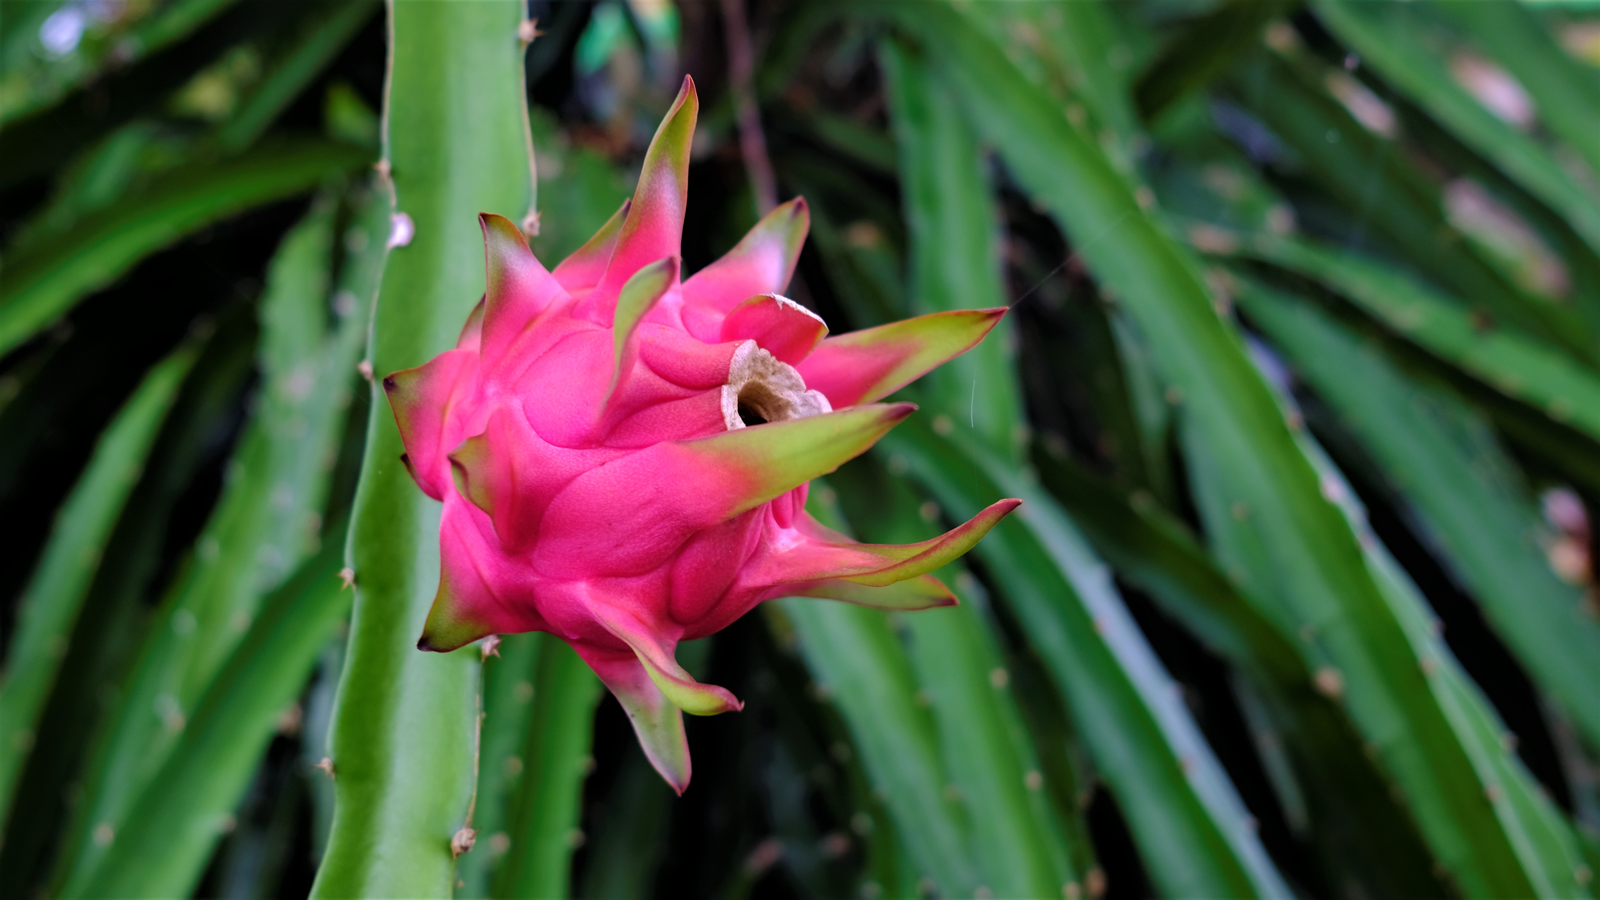 A pitaya or pitahaya is the fruit of several different cactus species indigenous to the Americas. These fruits are commonly known in English as "dragon fruit"